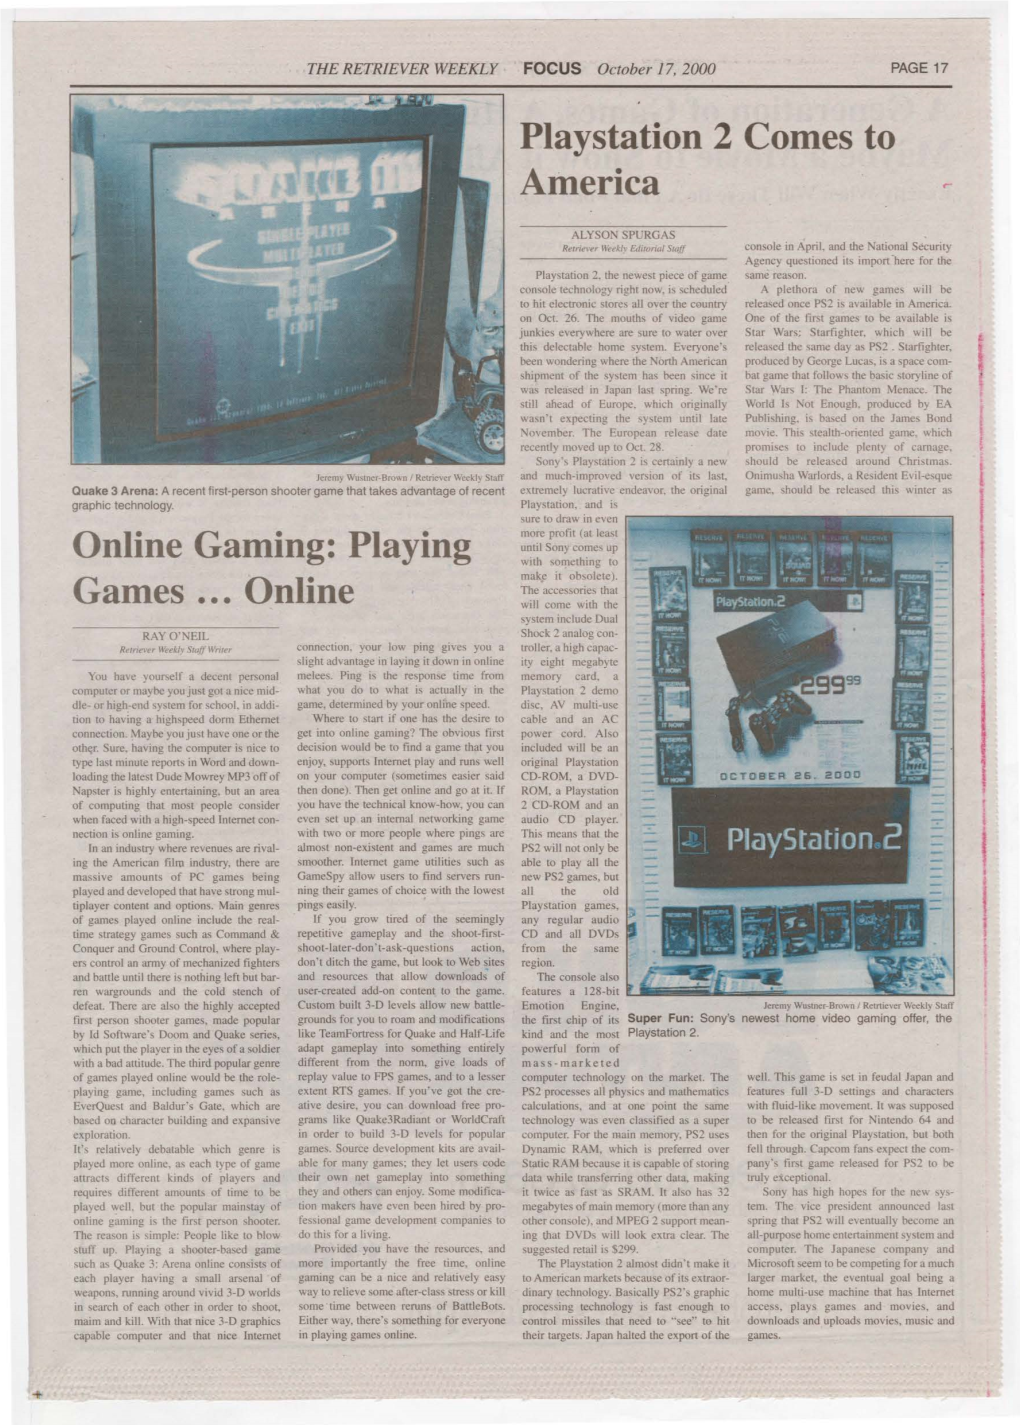 Online Gaming: Playing Games ...Online Playstation 2 Comes To